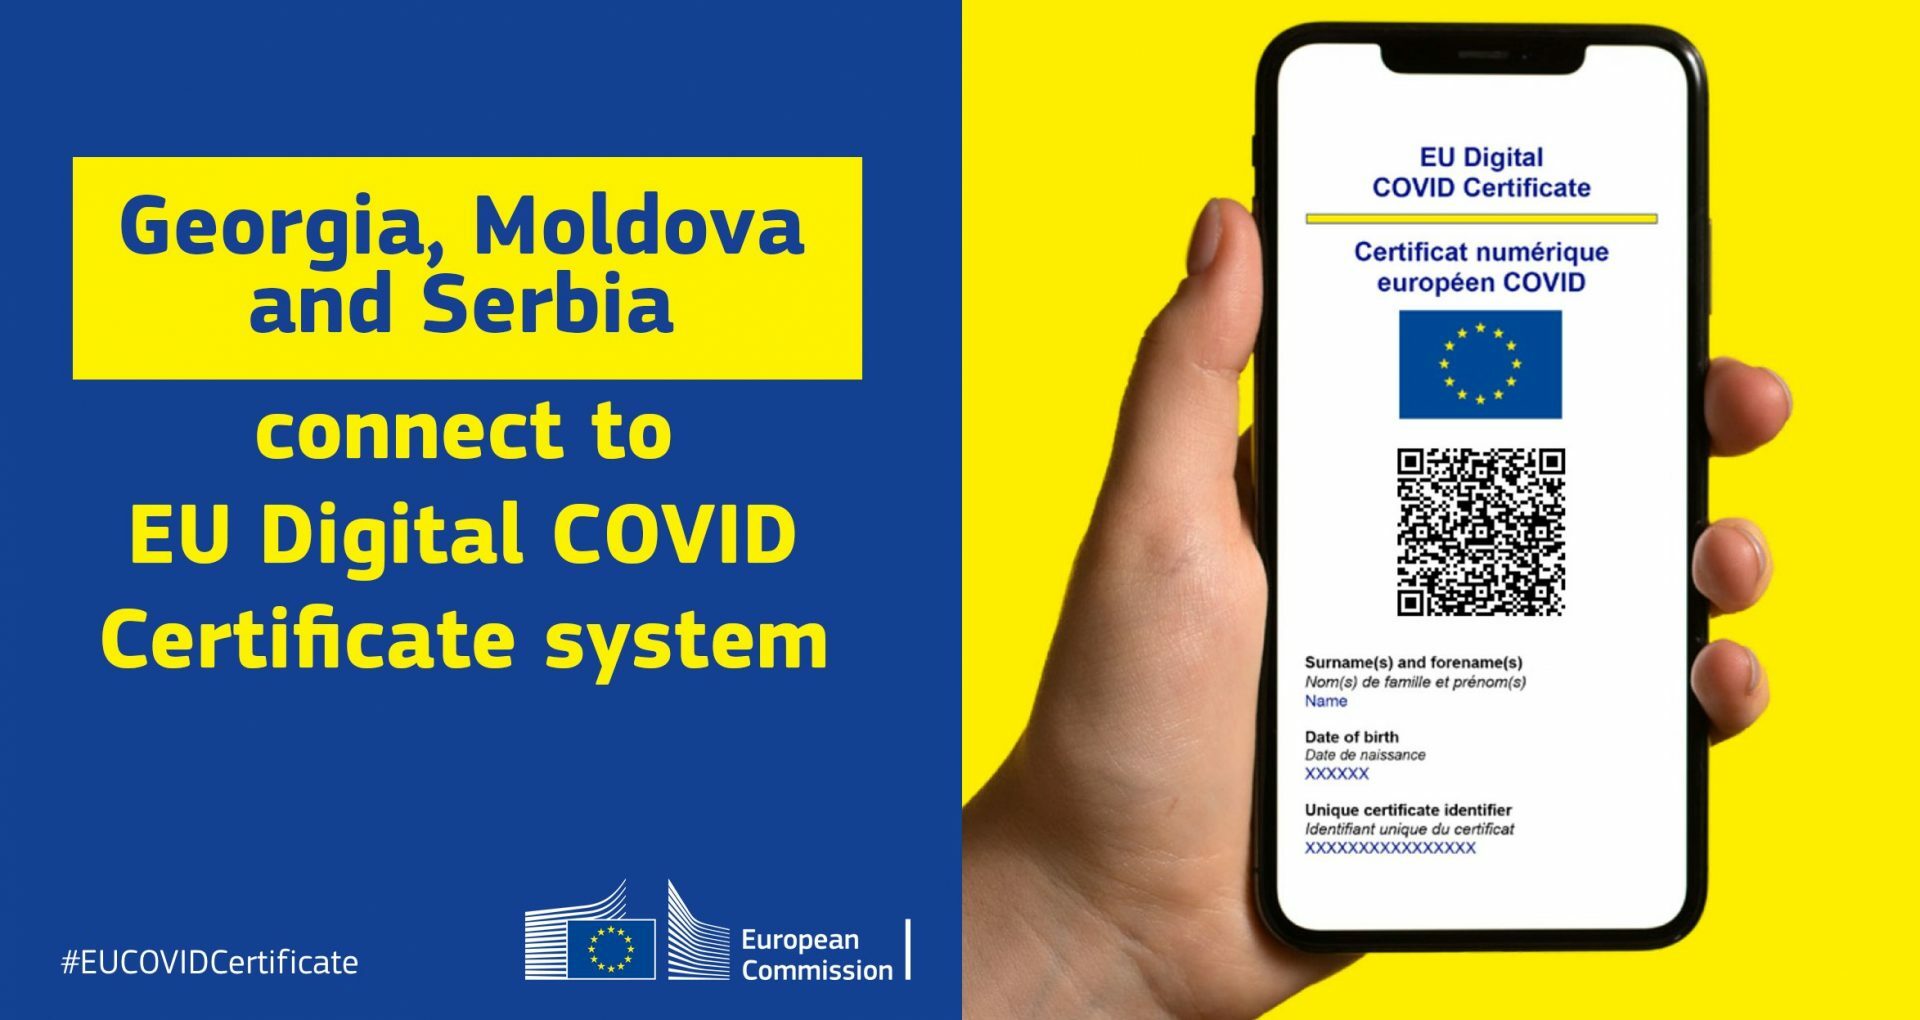 The COVID-19 Certificates Issued by Moldova Became Equivalent to the EU COVID-19 Digital Certificate